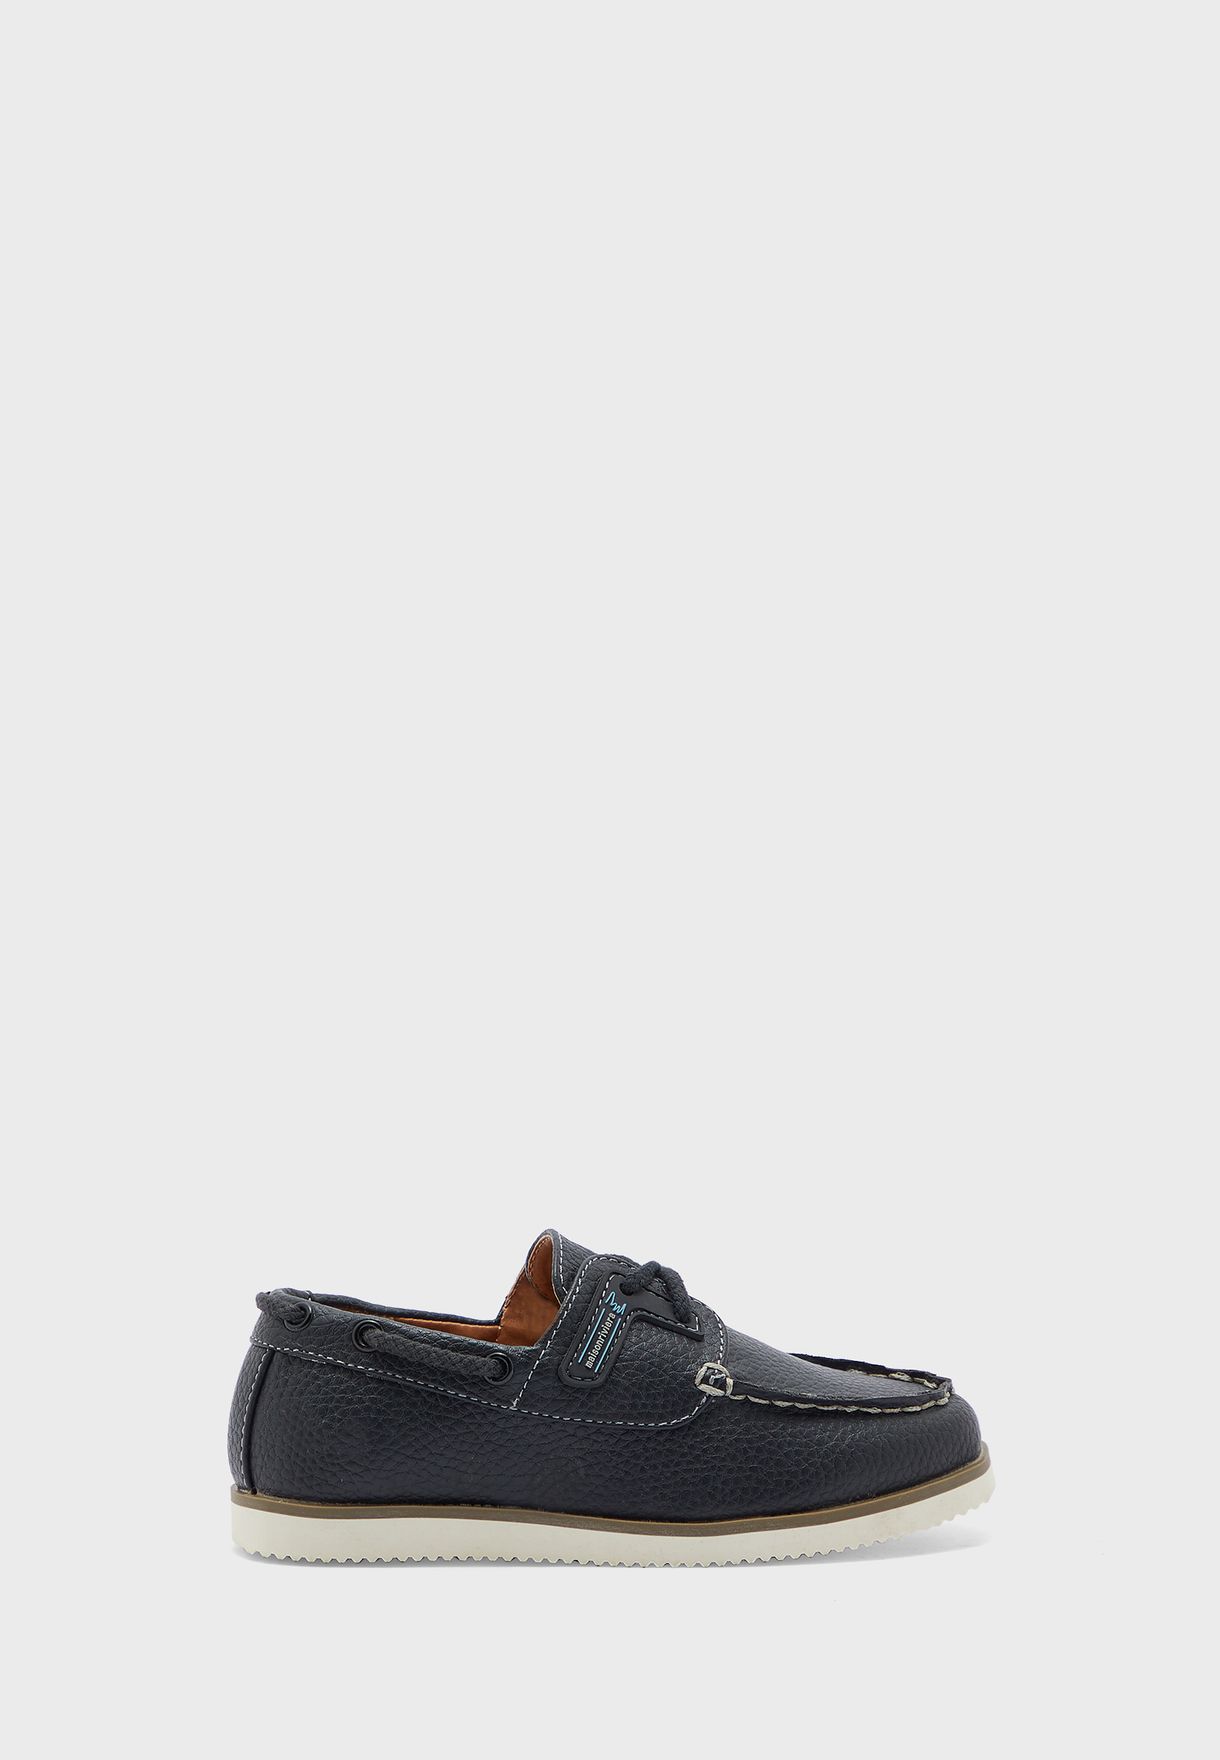 Kids Patched Boat Shoe